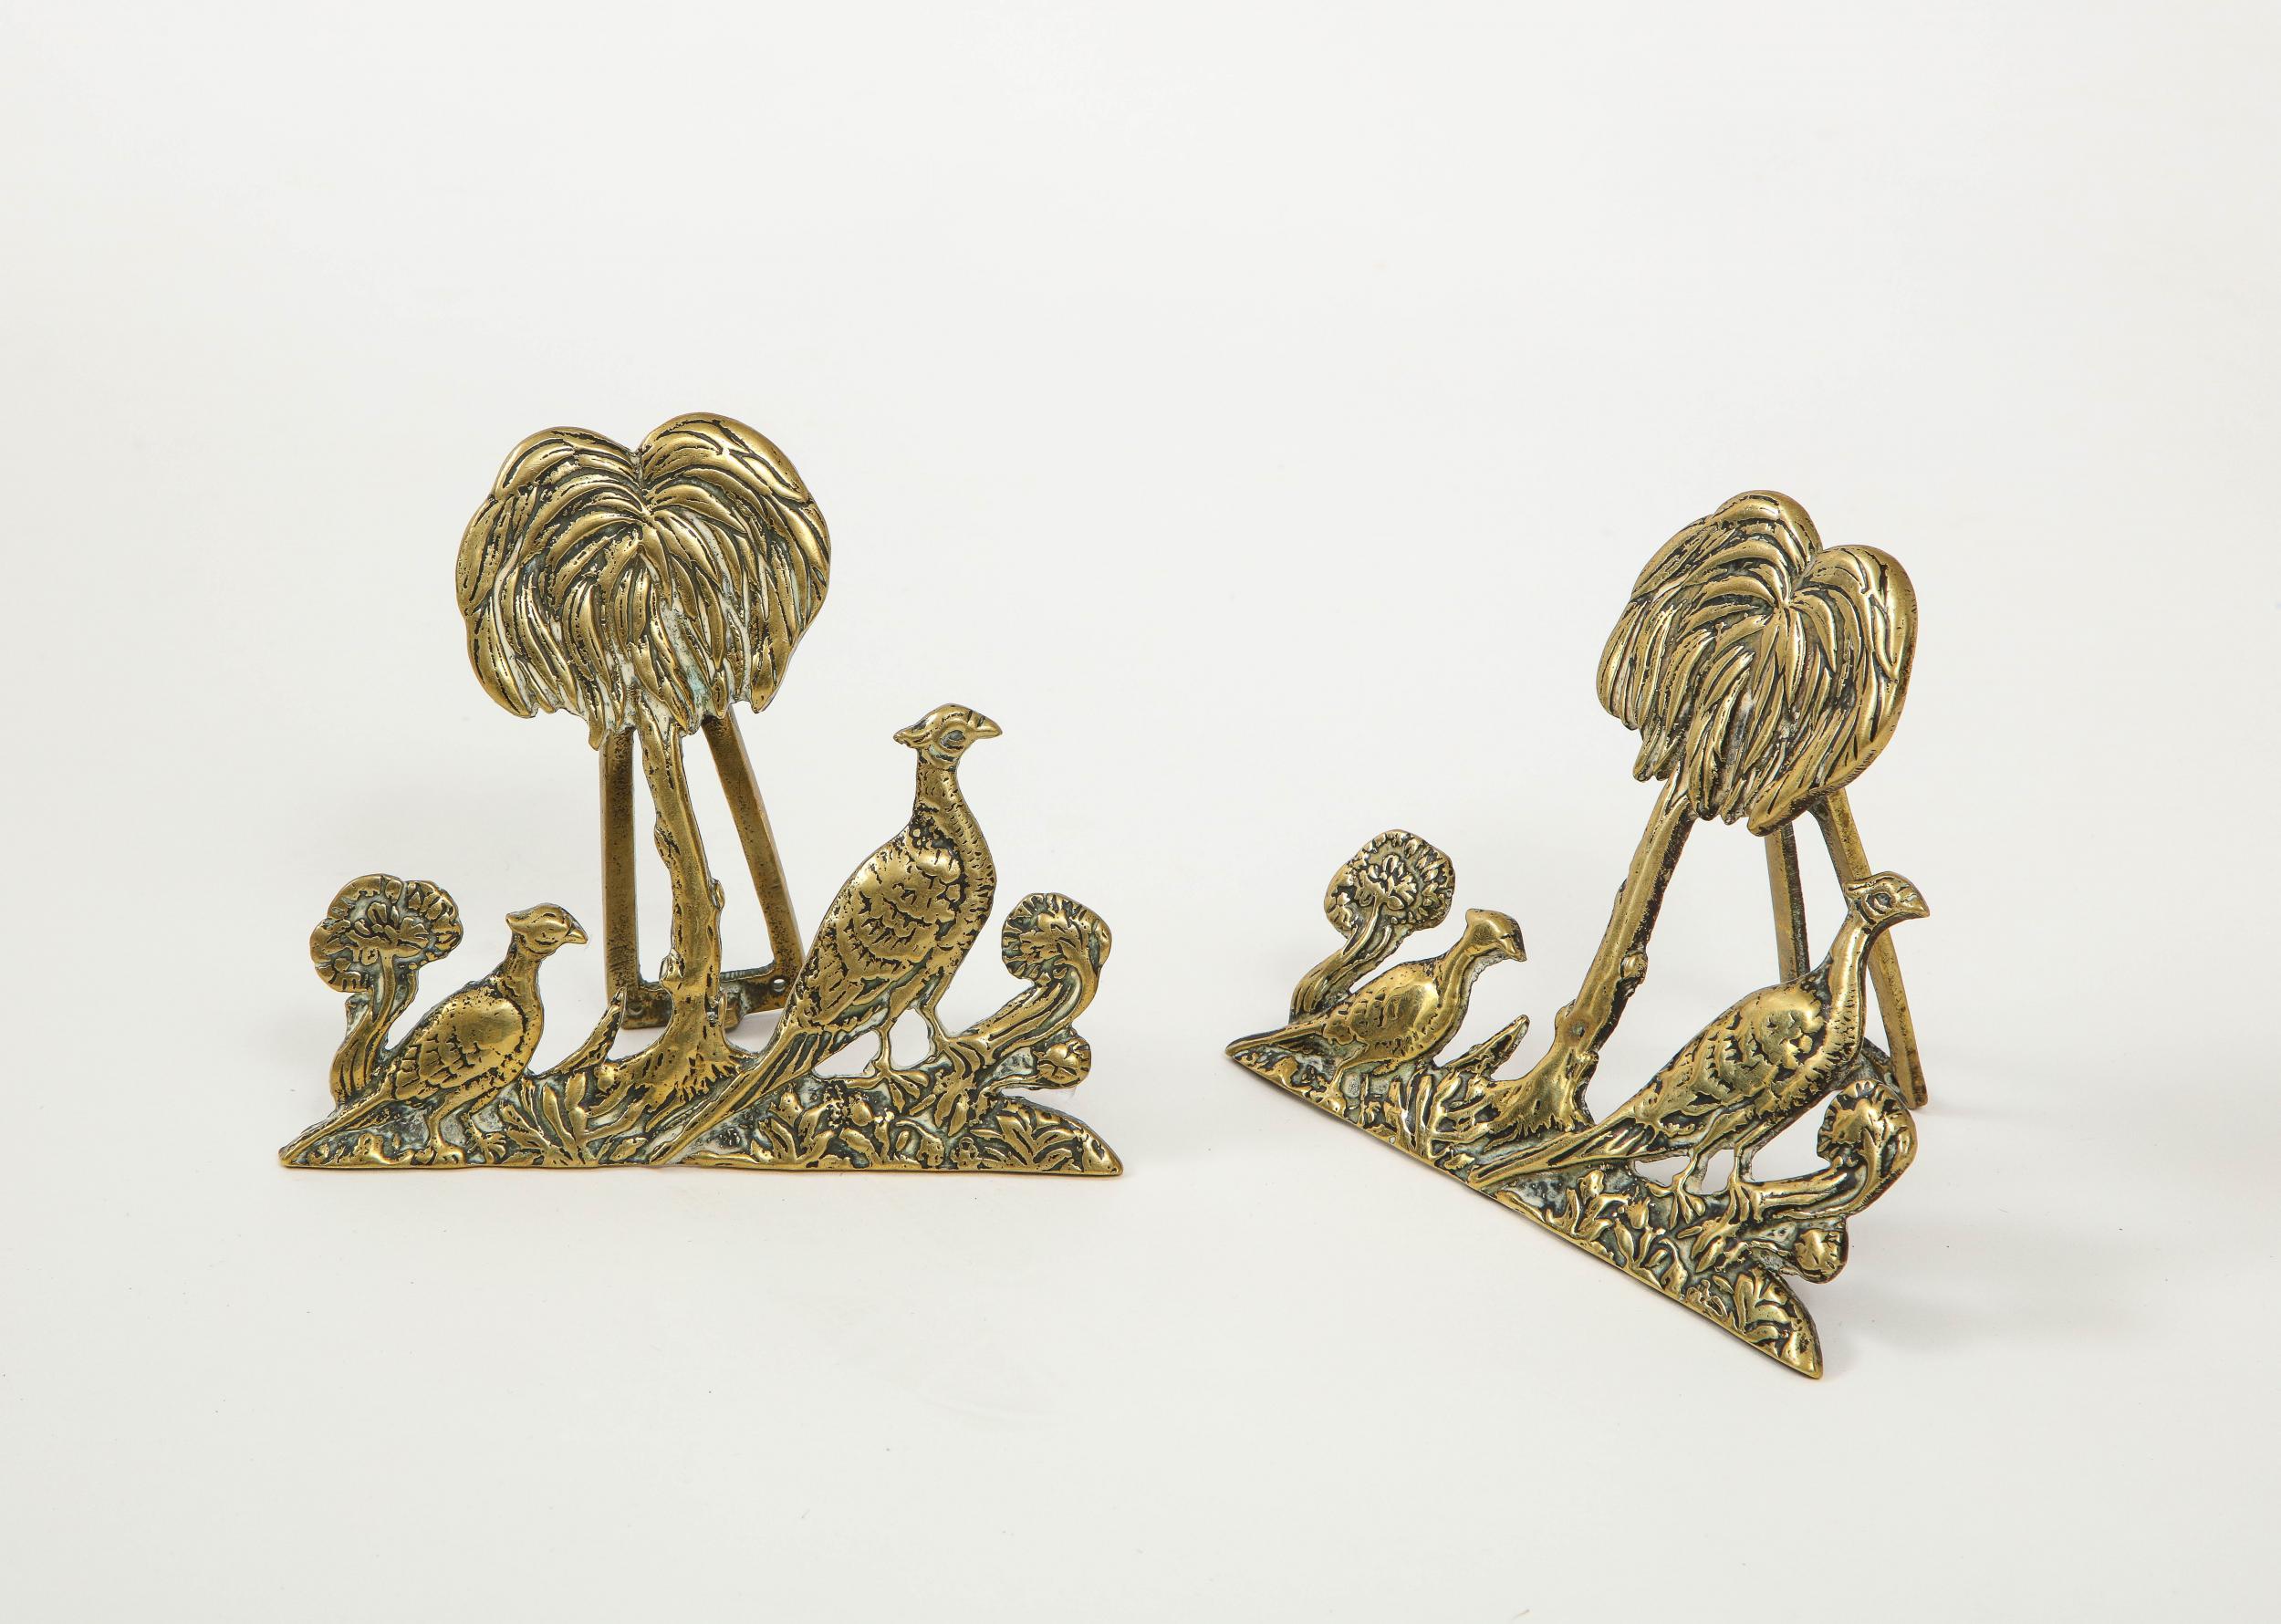 A pair of brass decorative objects, possibly door knockers, on a hinge or stand. Design of palm trees and birds.